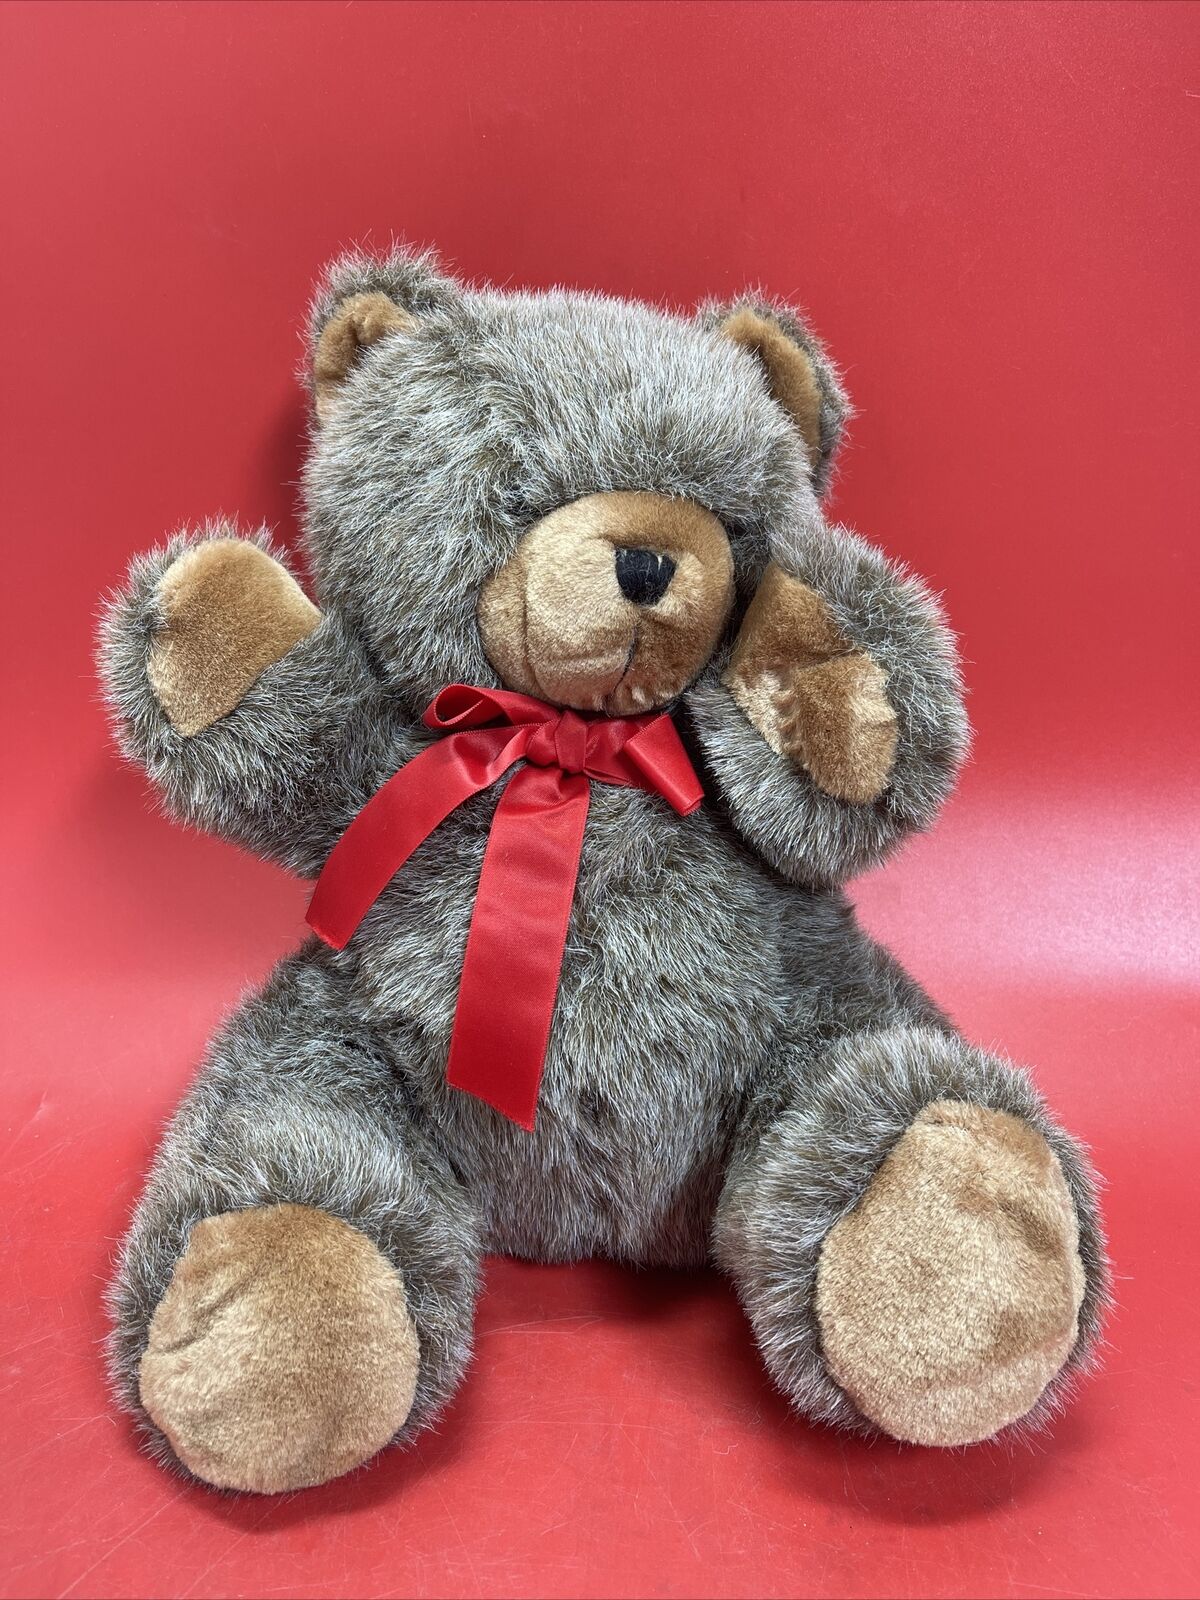 Vintage Teddy Bear with Red Bow, 1972